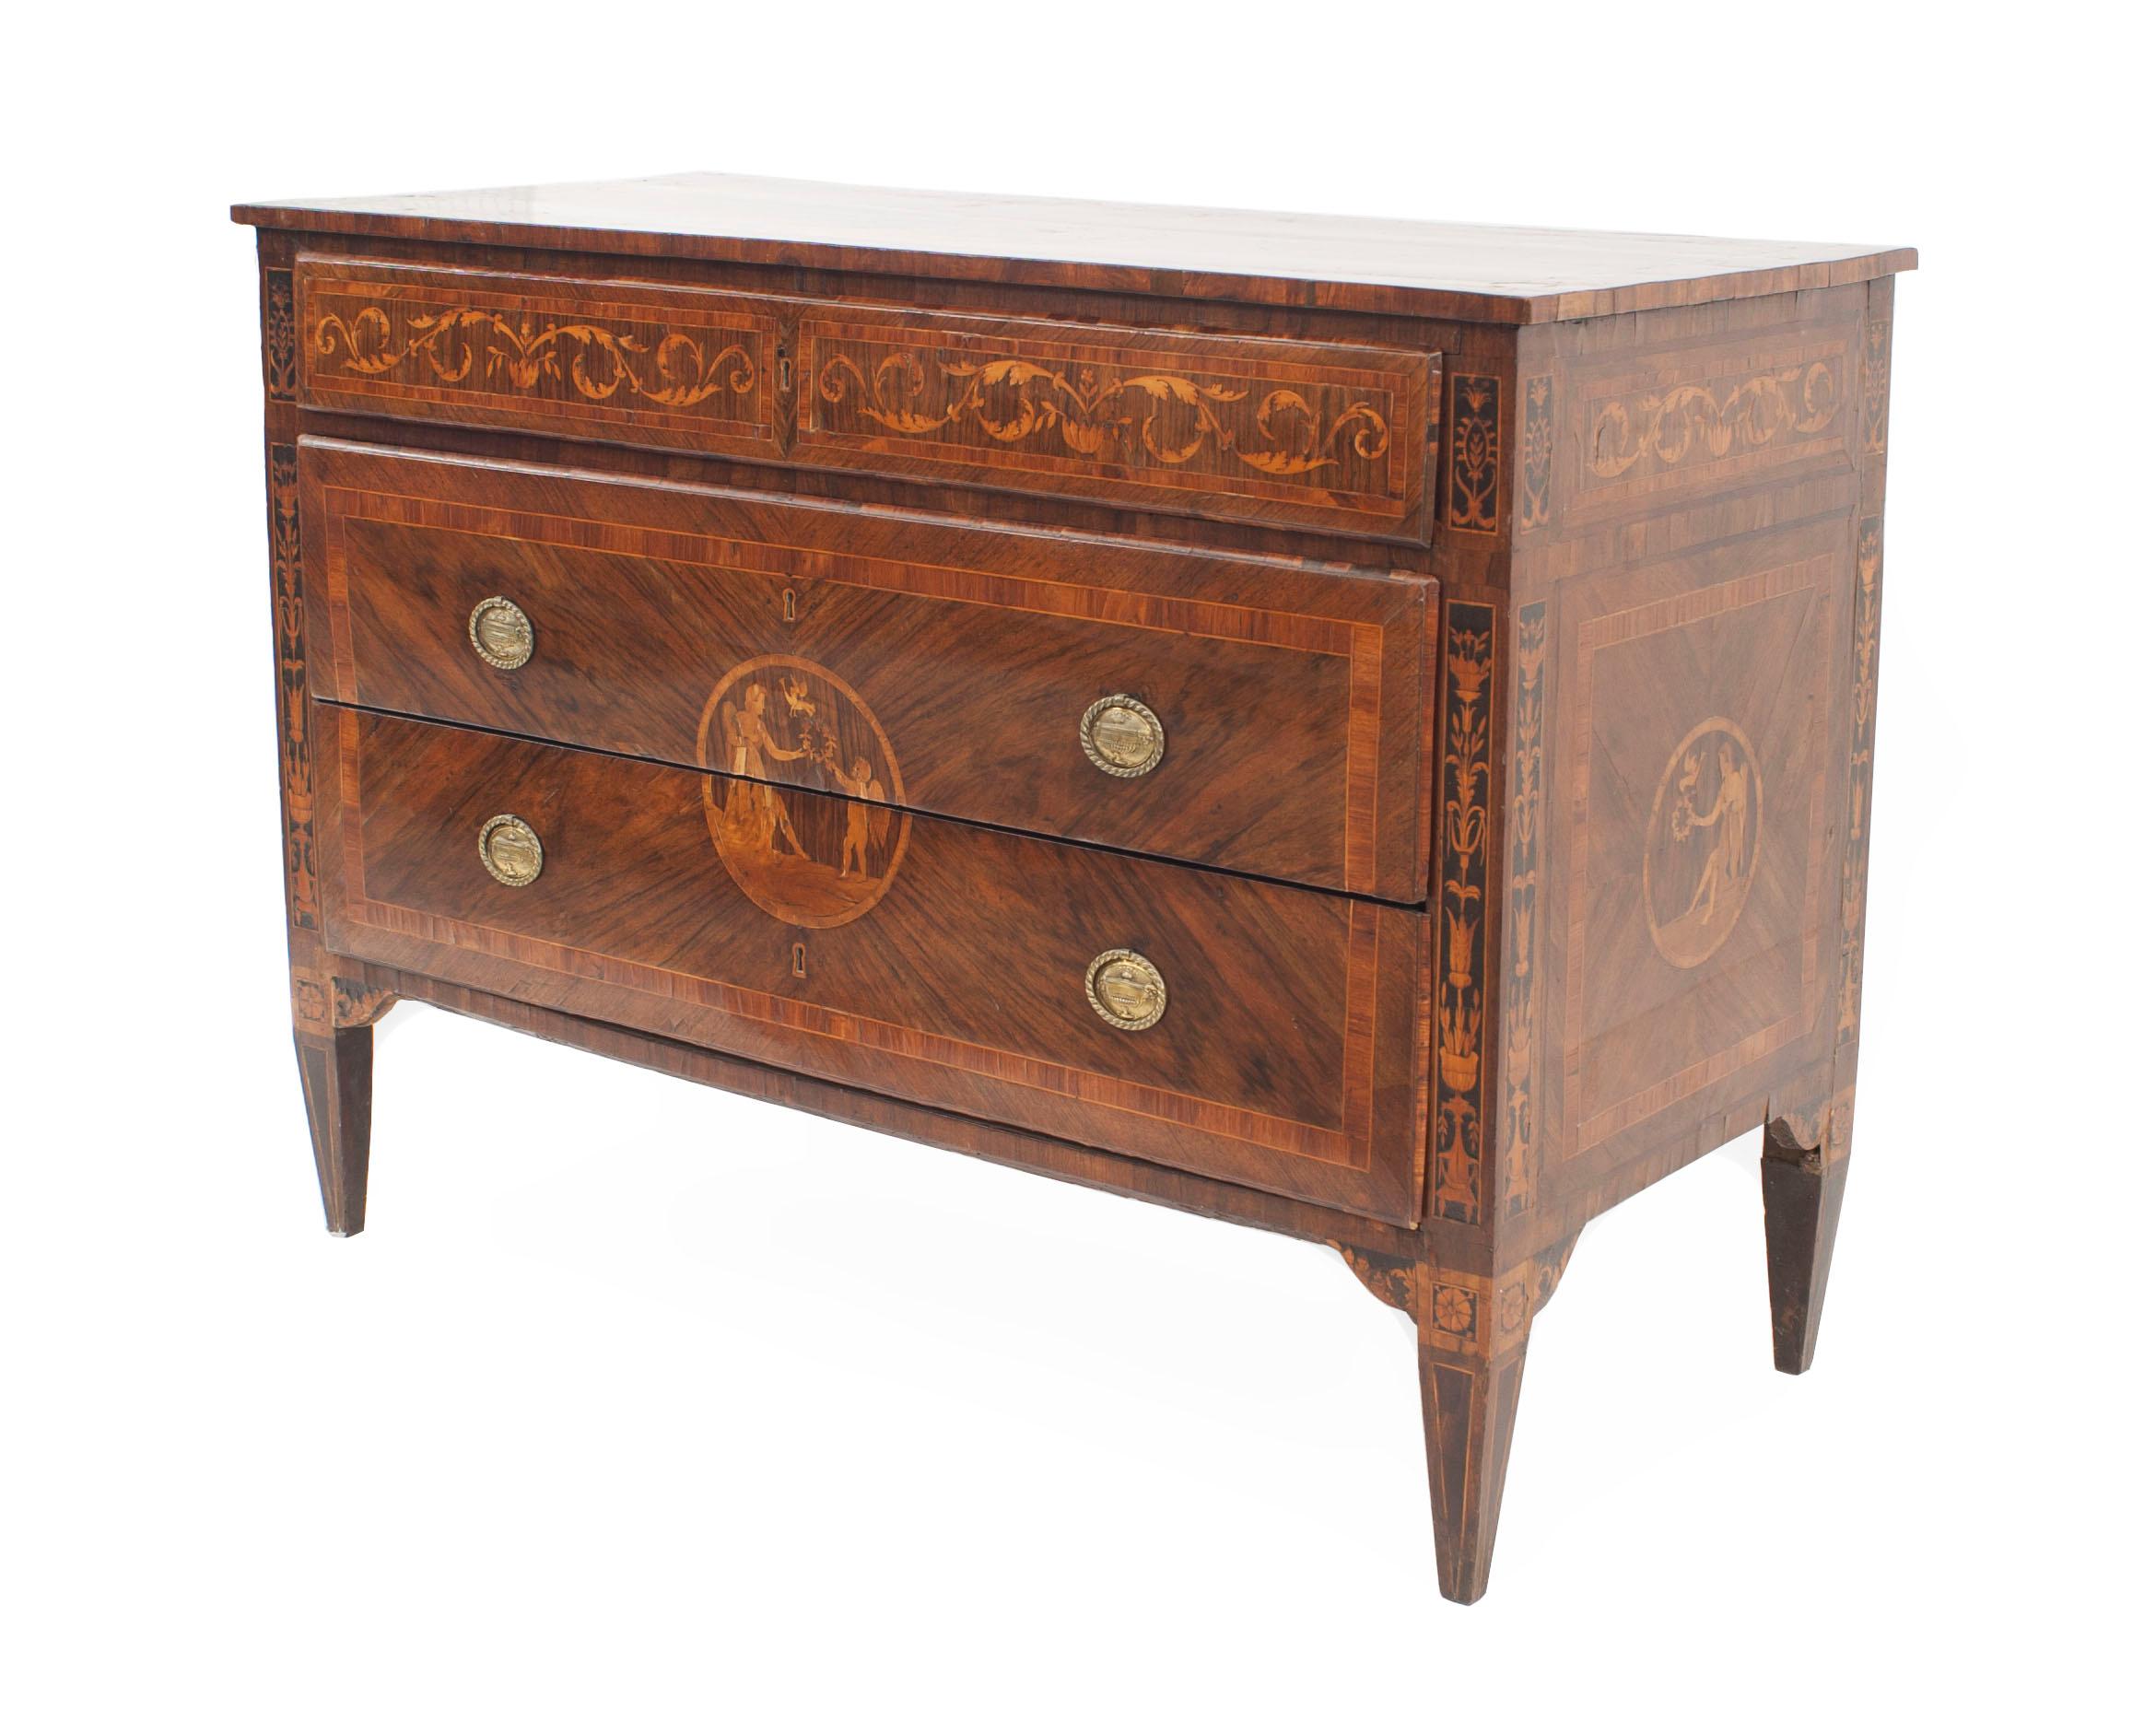 Northern Italian (late 18th Century) Neo-classical walnut commode with marquetry & a round inlaid medallion top with 3 drawers, 2 having brass urn handles (in the style of GIUSEPPE MAGGIOLINI)
